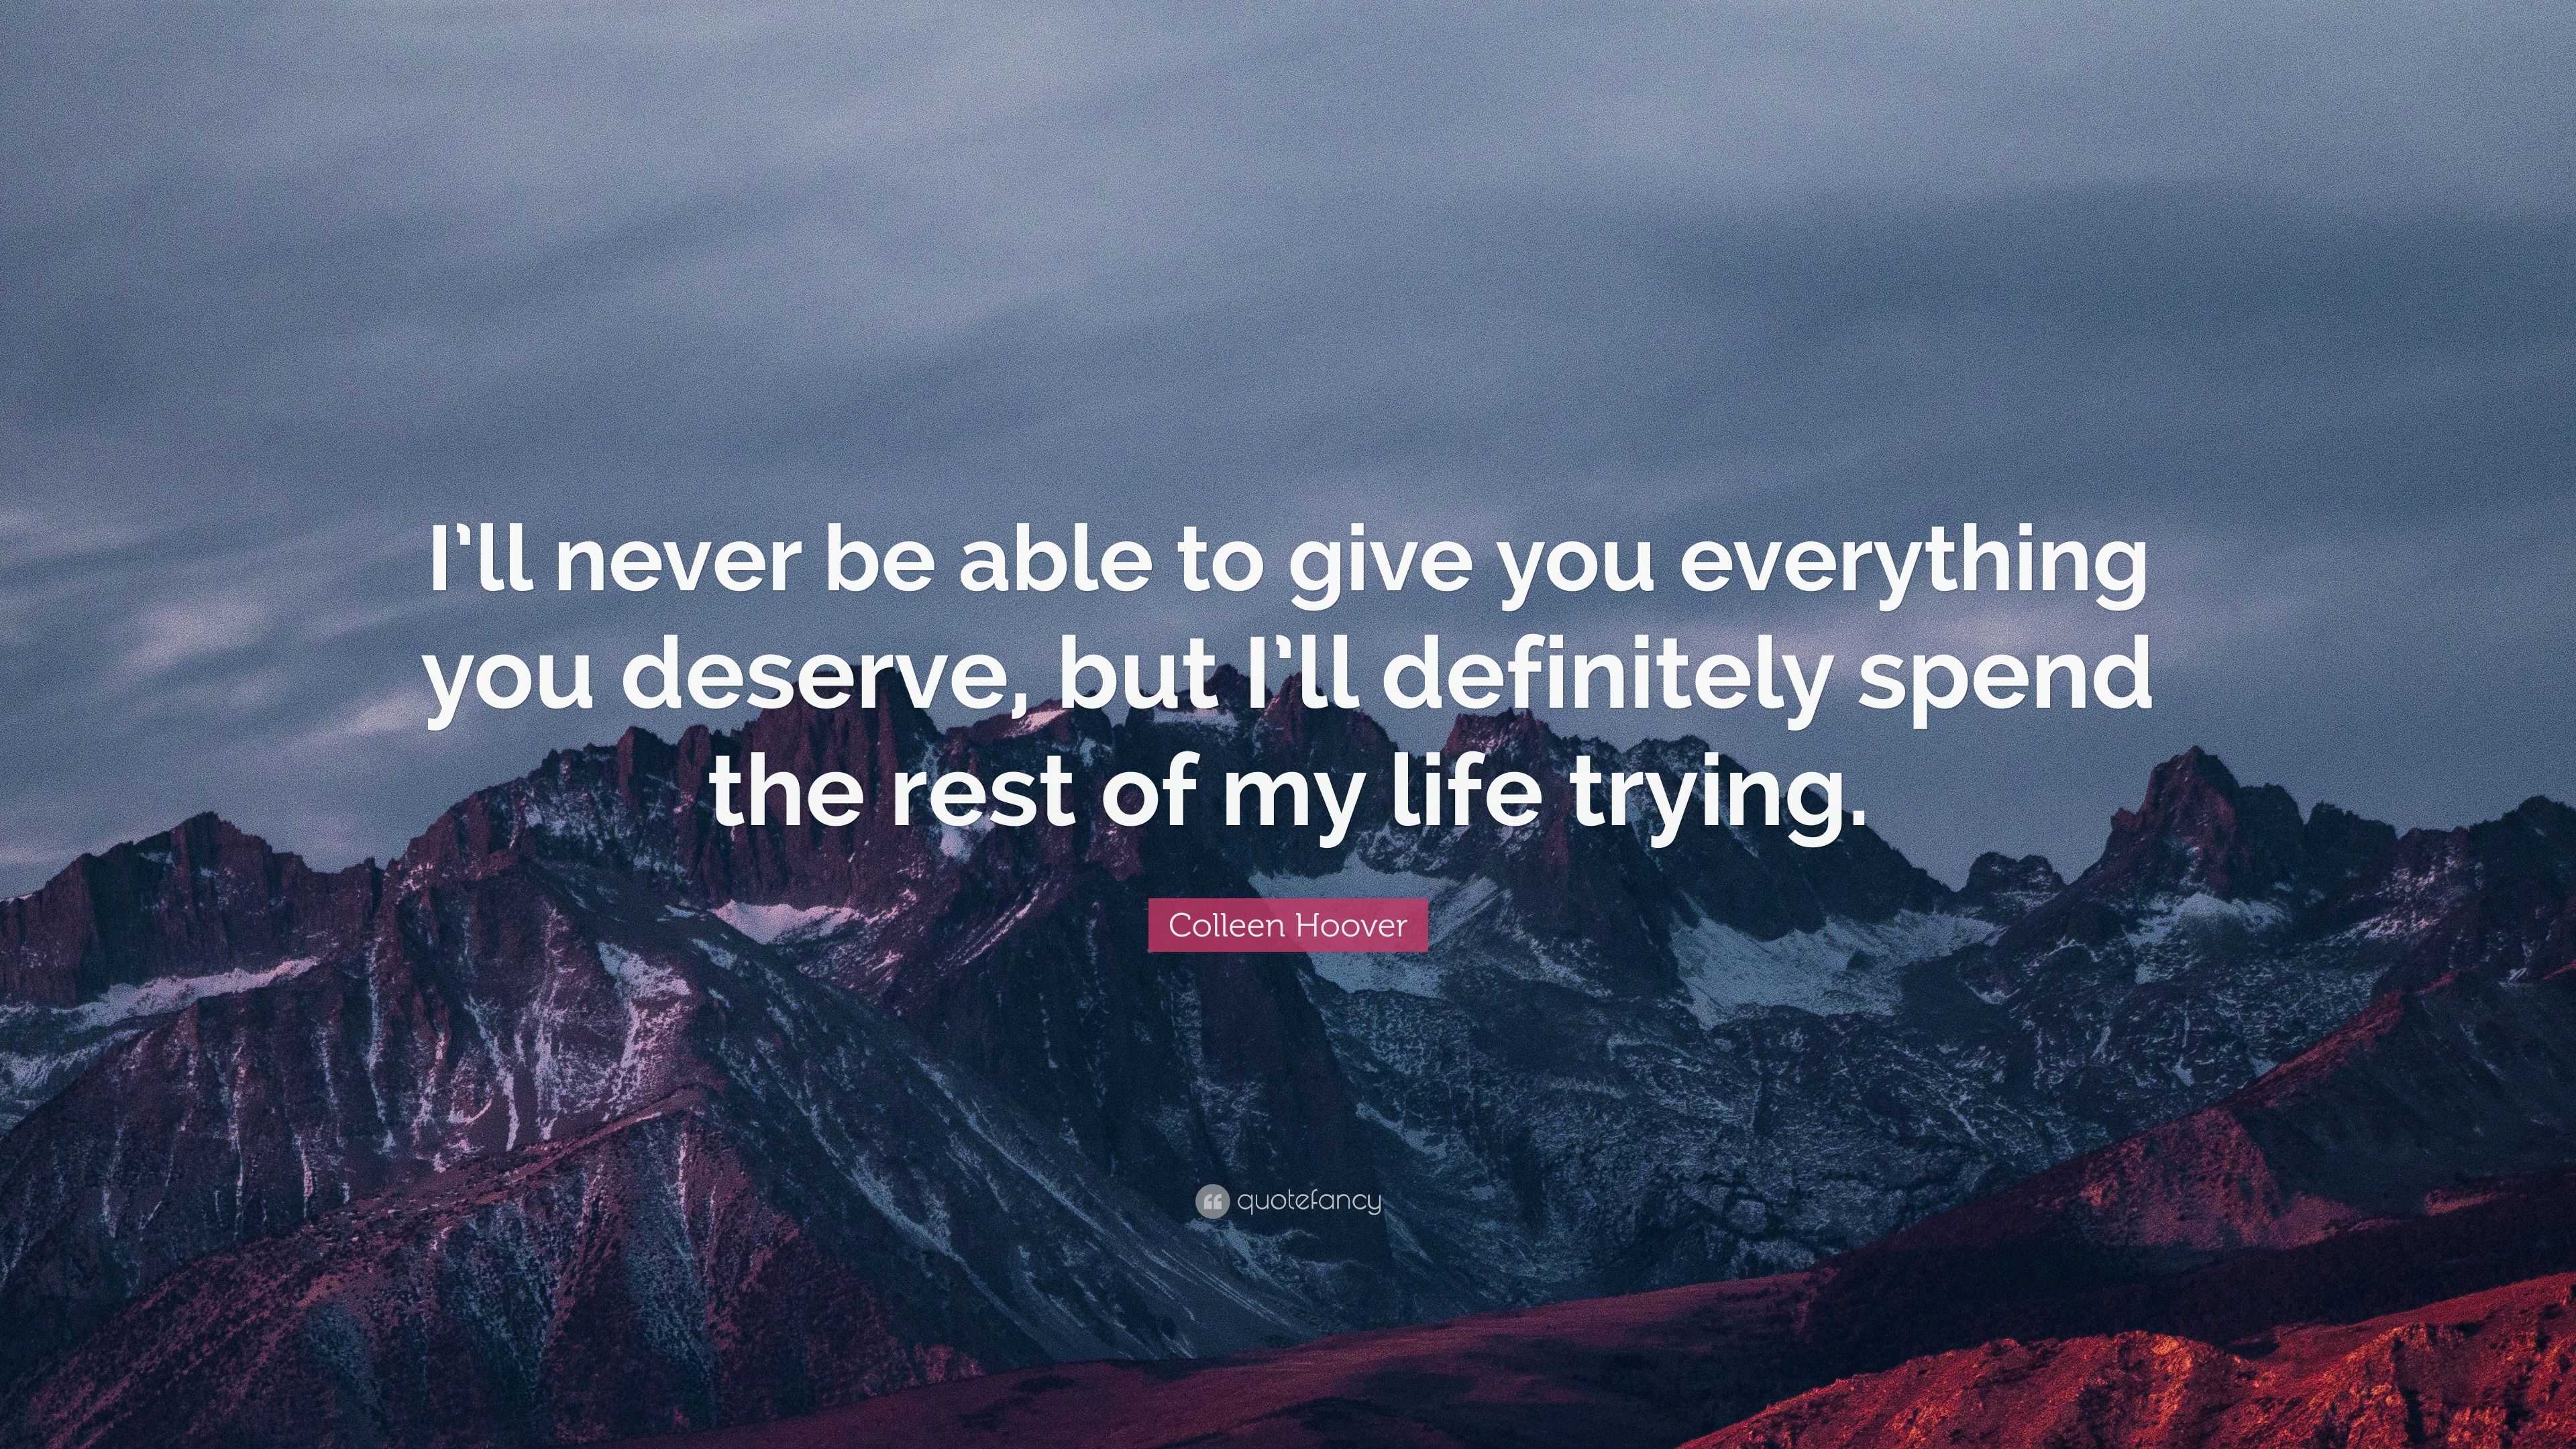 Colleen Hoover Quote: “I’ll never be able to give you everything you ...